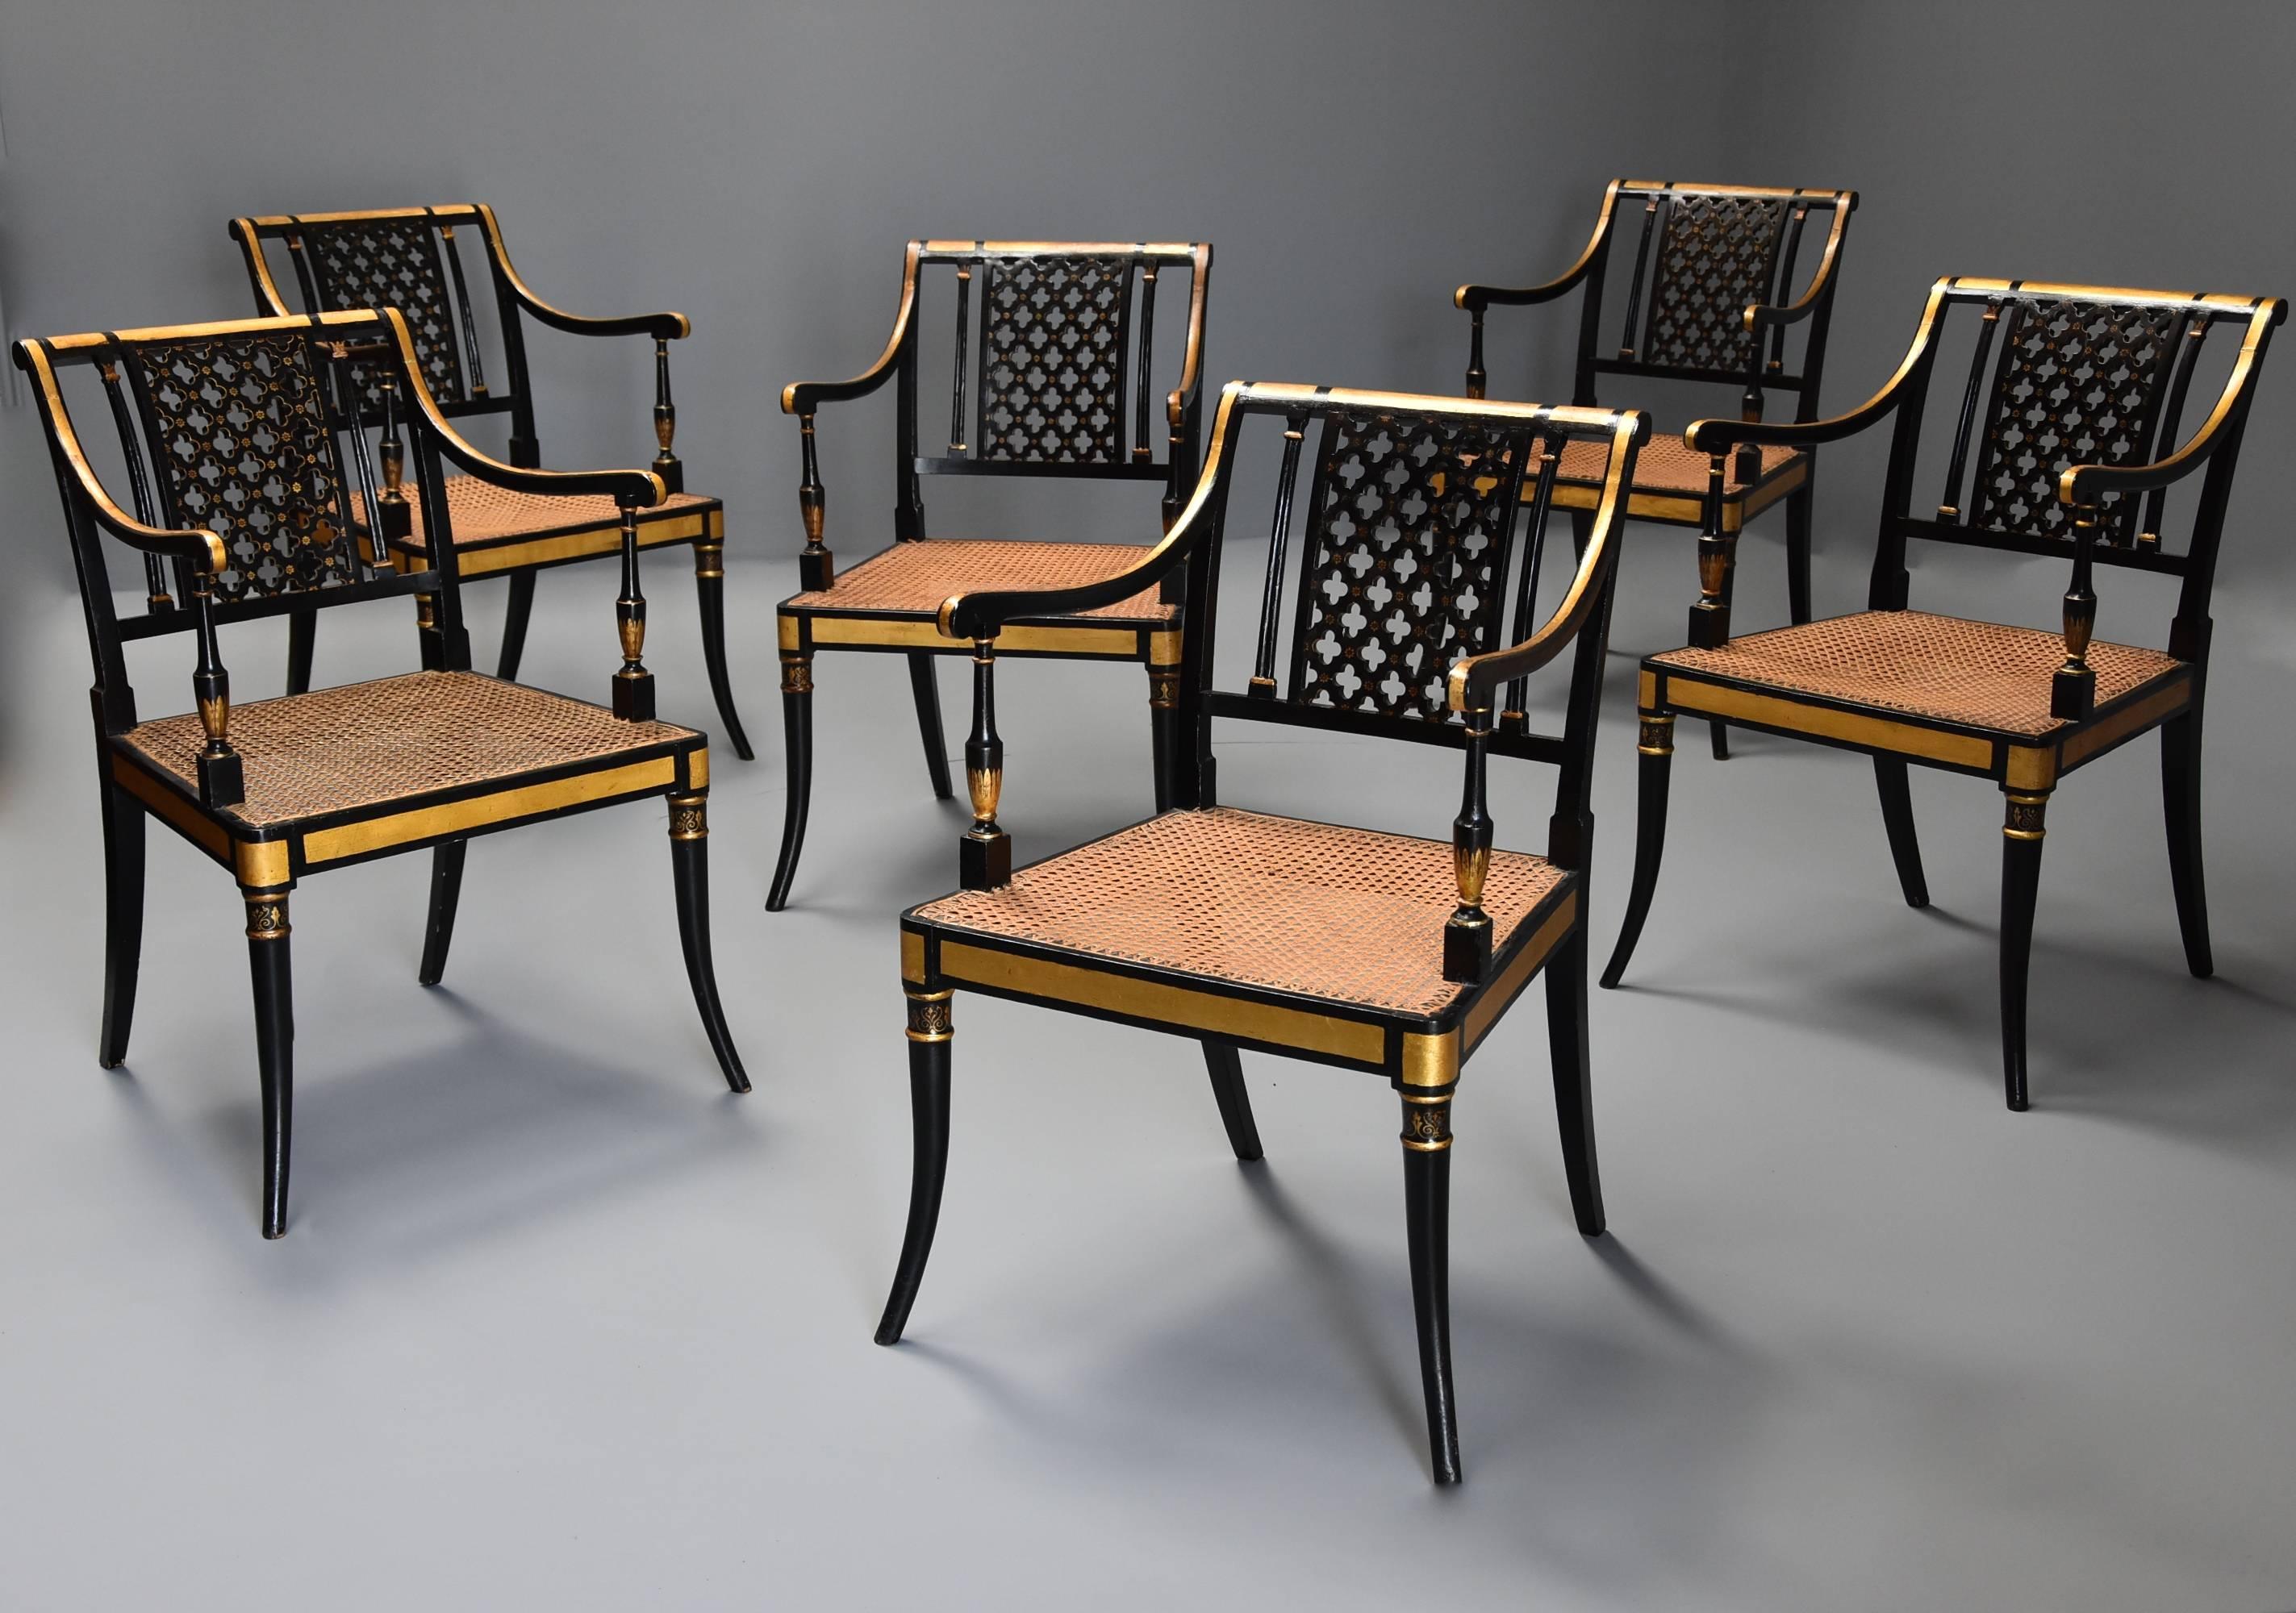 A highly decorative set of six Regency open armchairs with black painted and gilt finish.

This set of chairs each consist of a rounded top rail leading down to a central pierced quatrefoil back splat with painted floral decoration with reeded